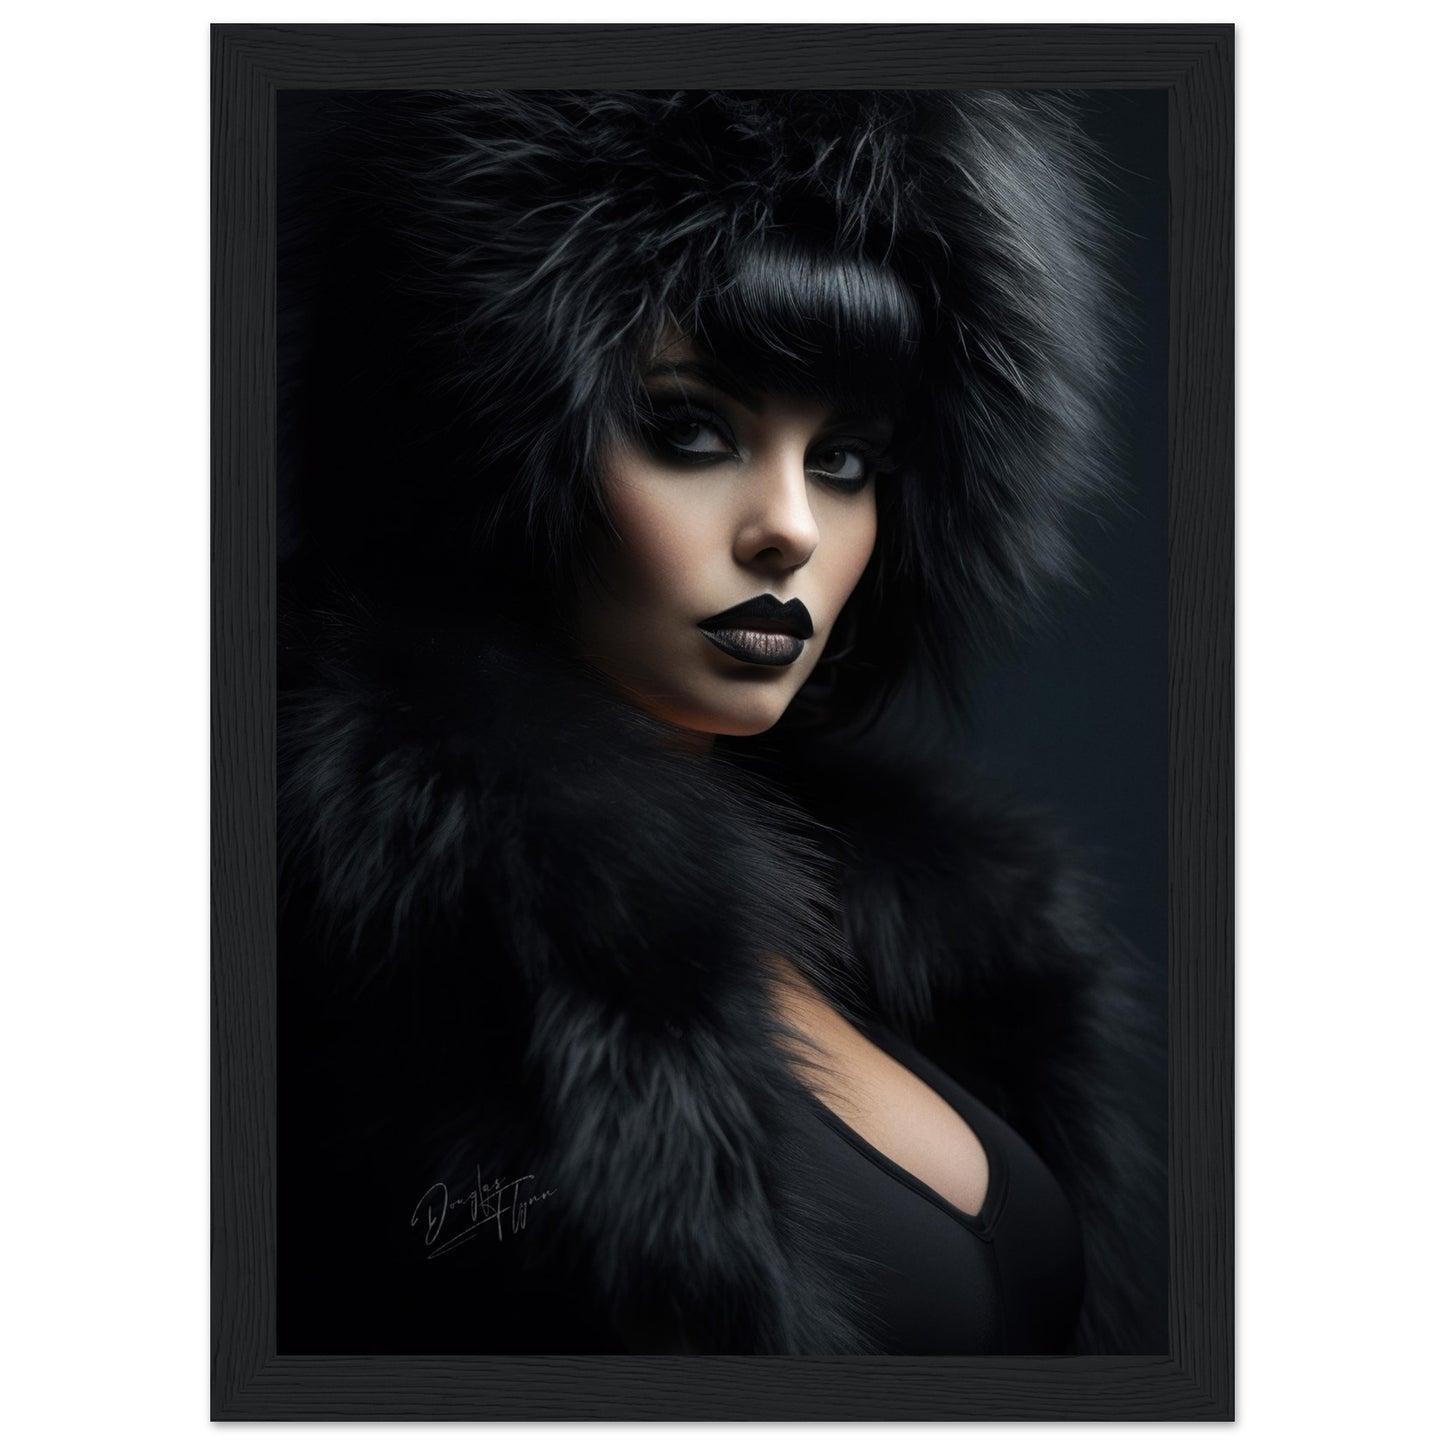 »Girl With Black Fur 3«